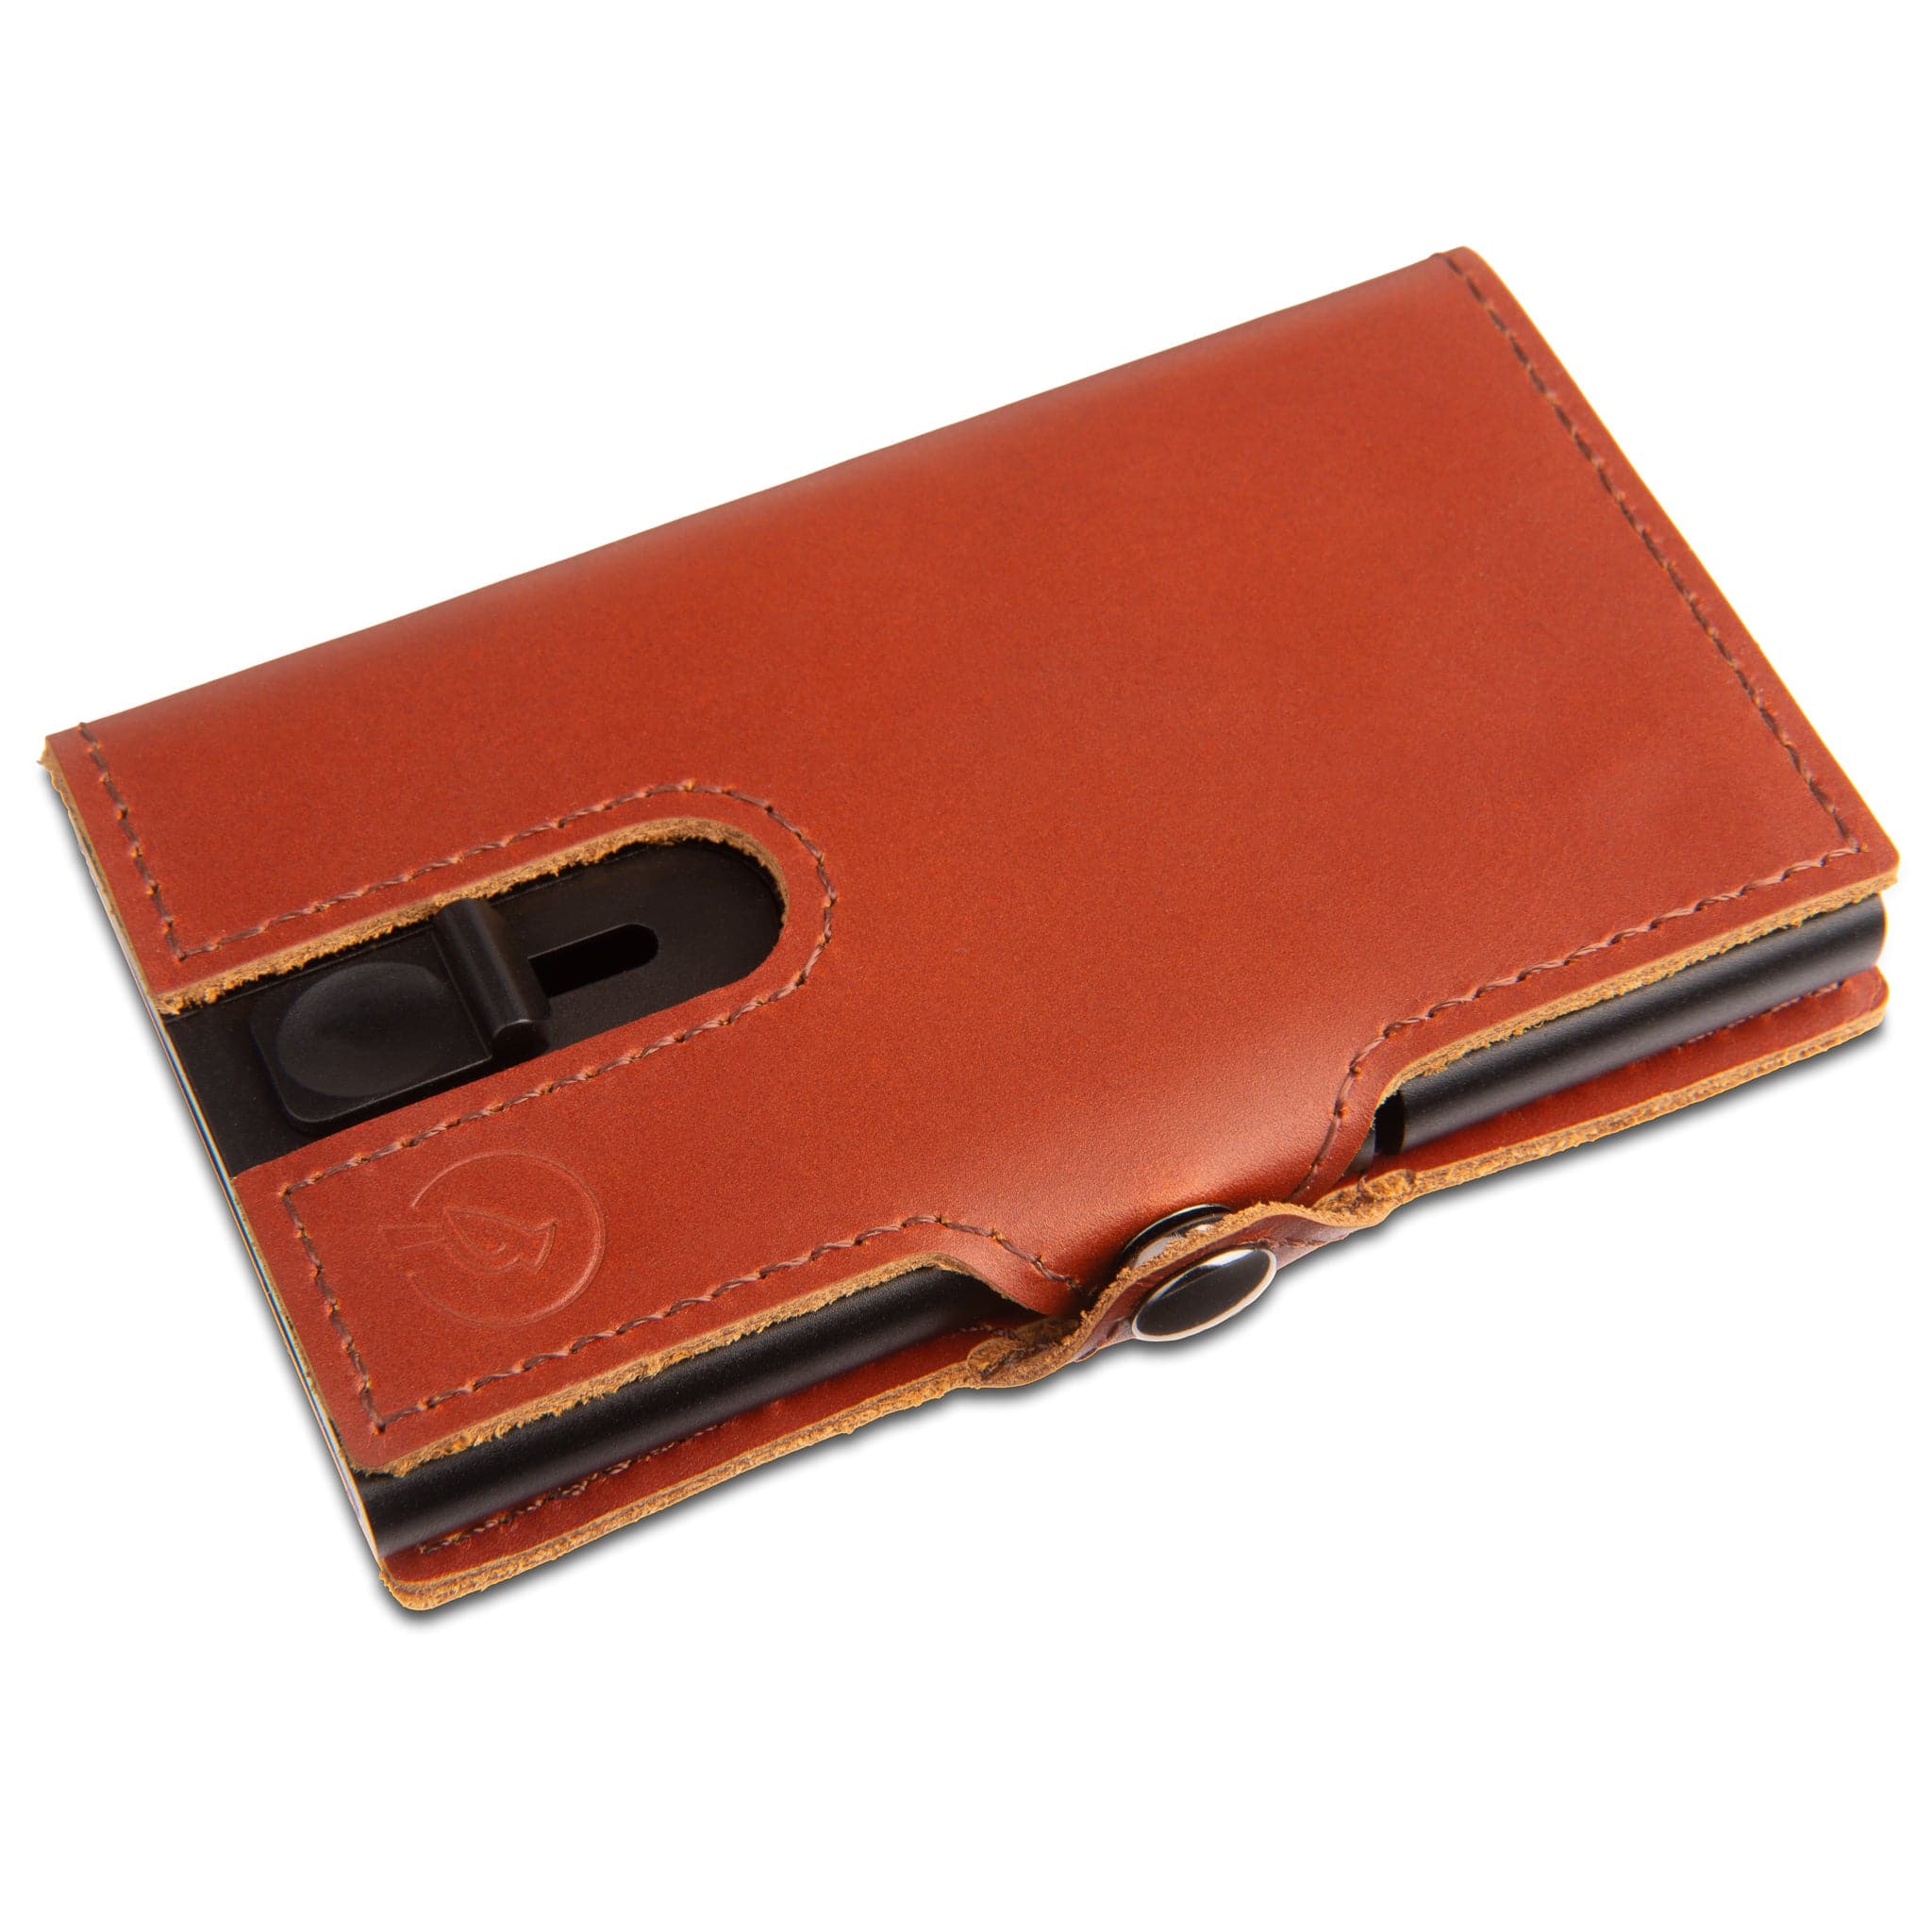 Cardinal Brown leather wallet